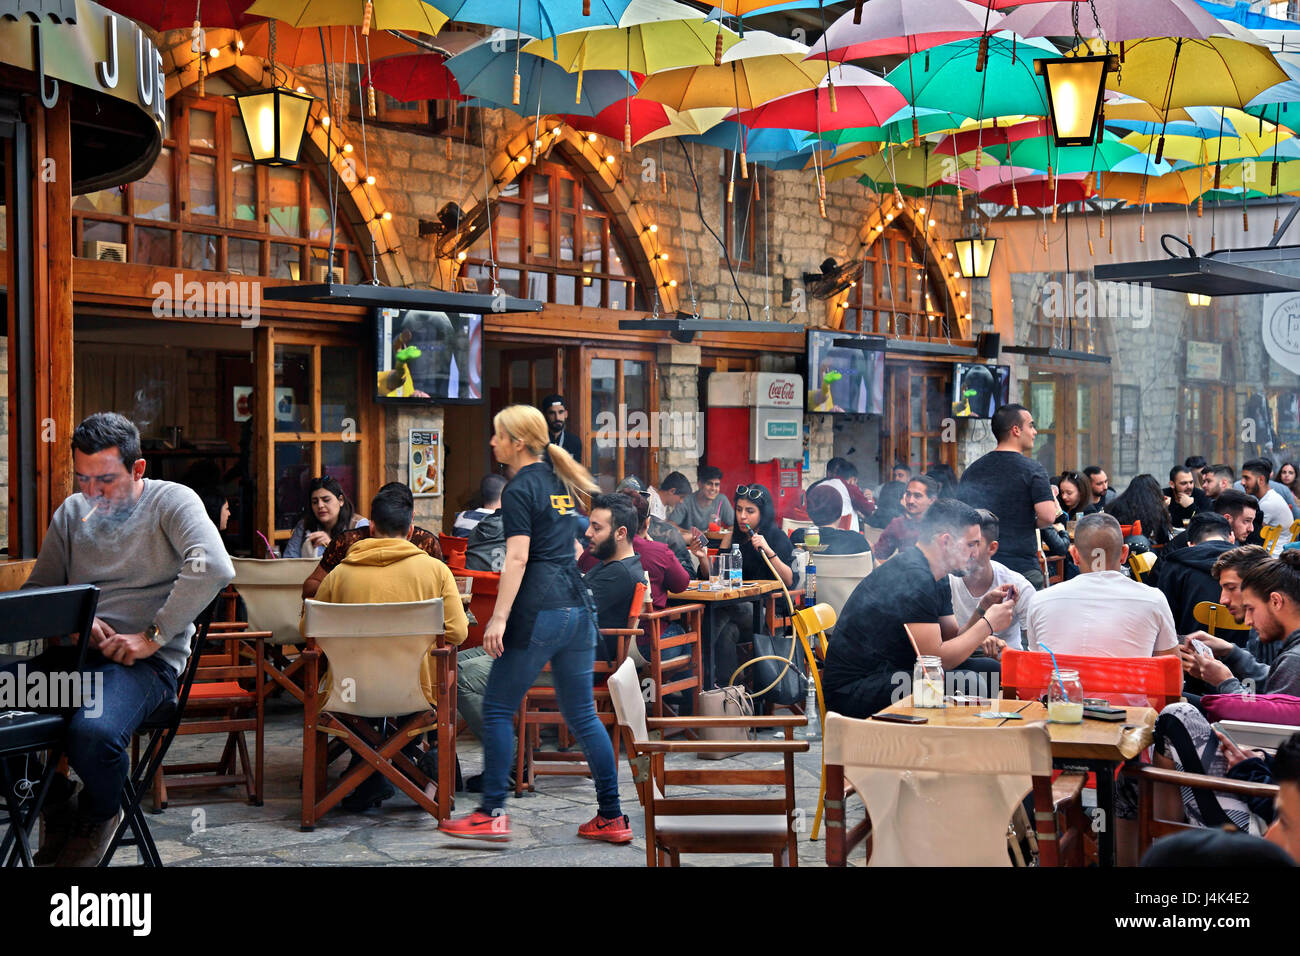 Colorful and 'waterproof' café ('Juego') in the old town of Lemessos (Limassol), Cyprus. Stock Photo